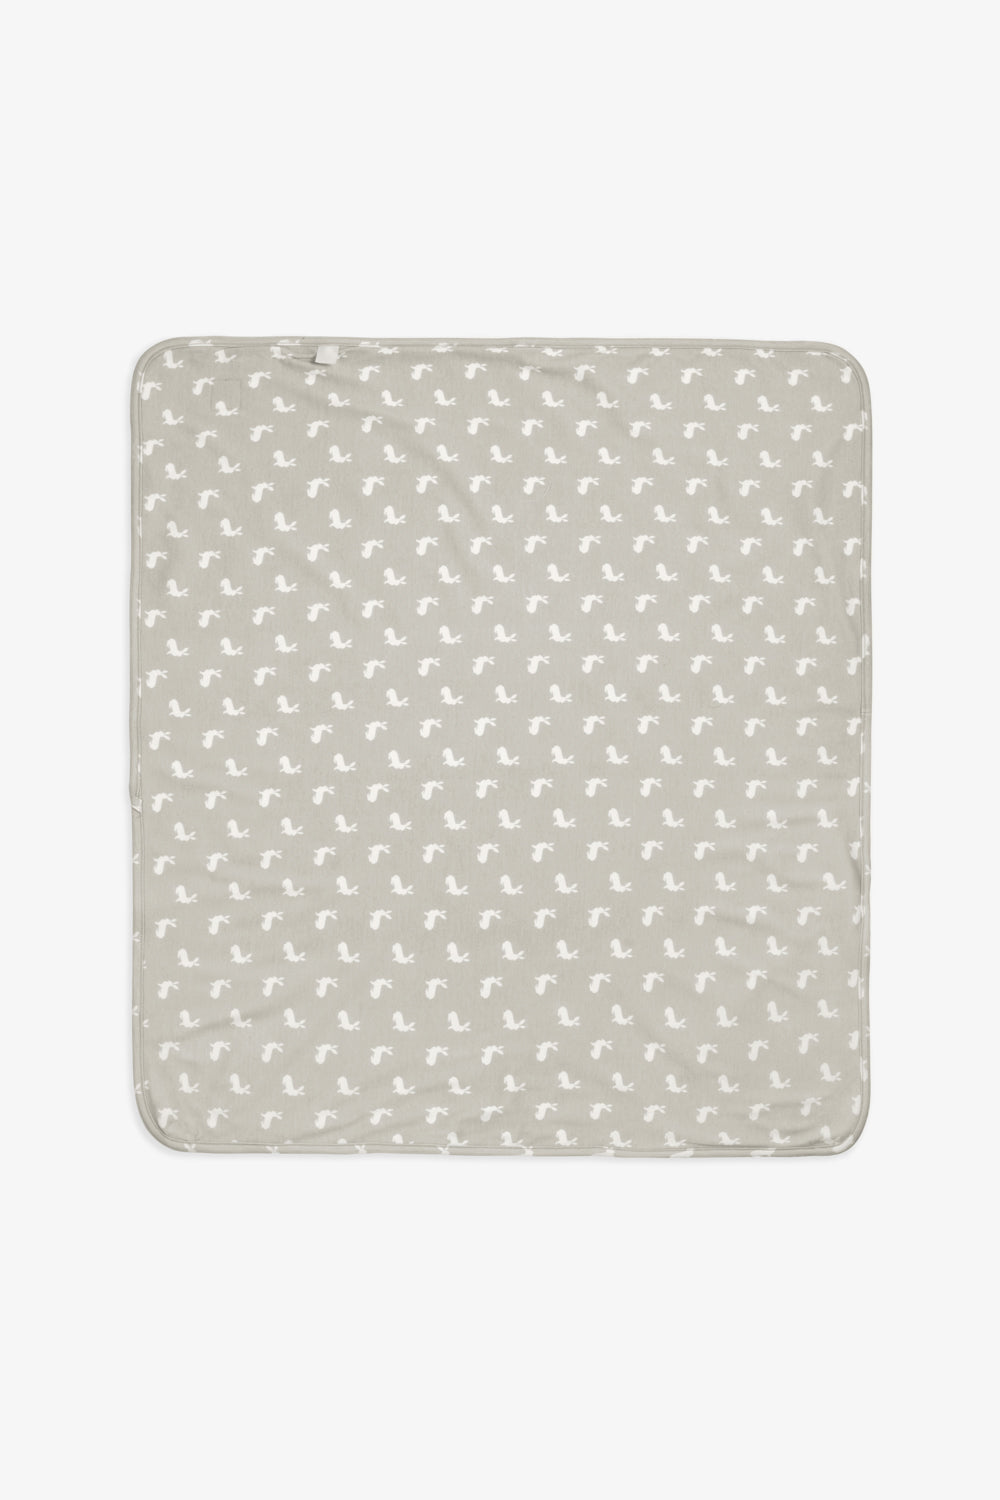 Jersey Blanket white woodland and fawn hare print